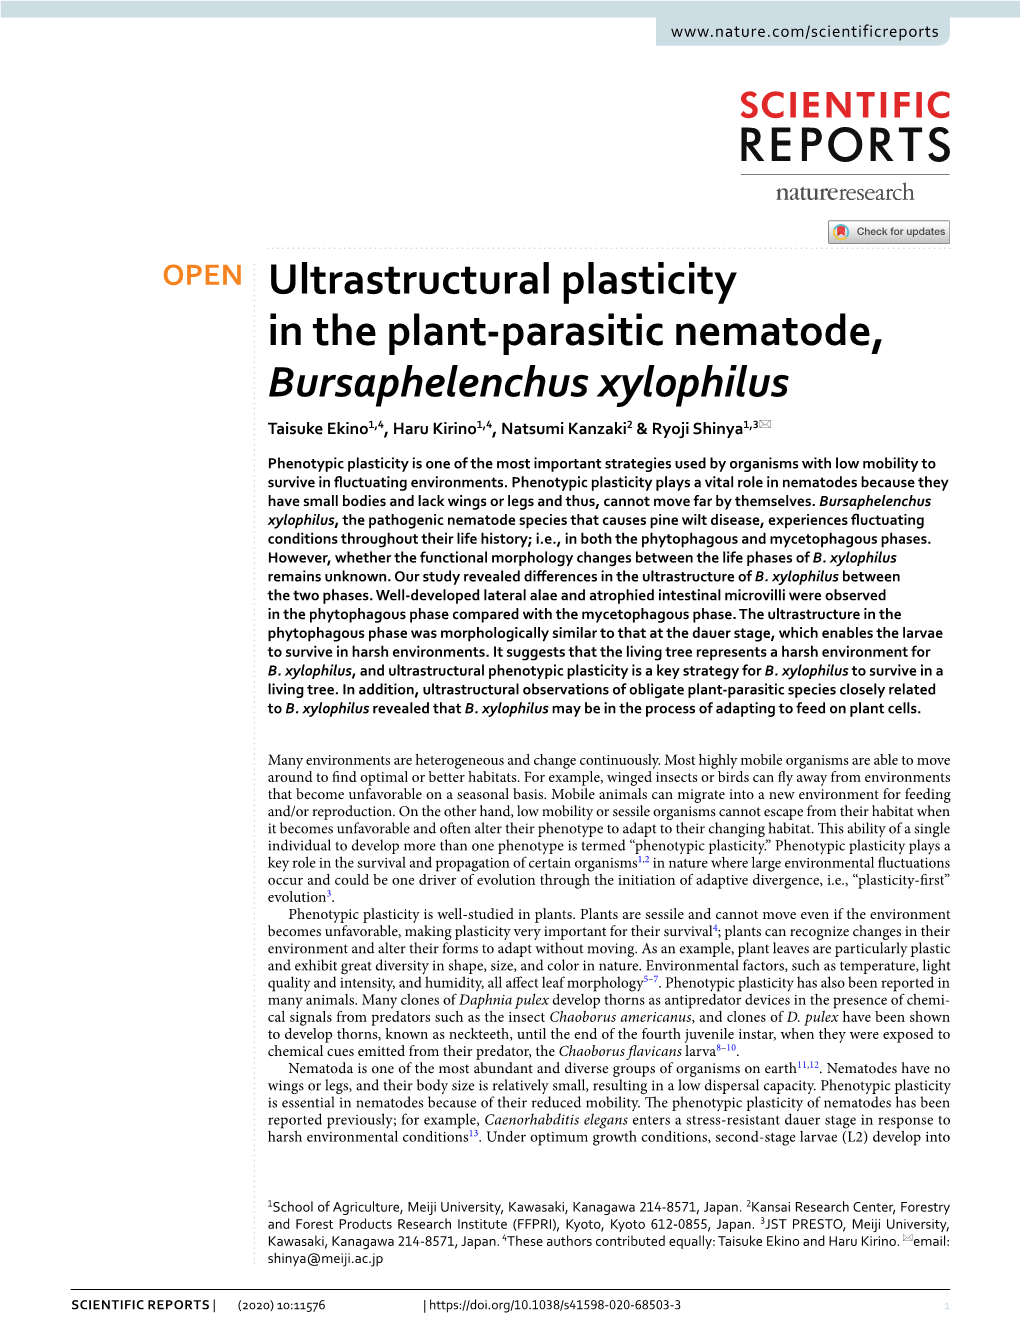 Ultrastructural Plasticity in the Plant-Parasitic Nematode